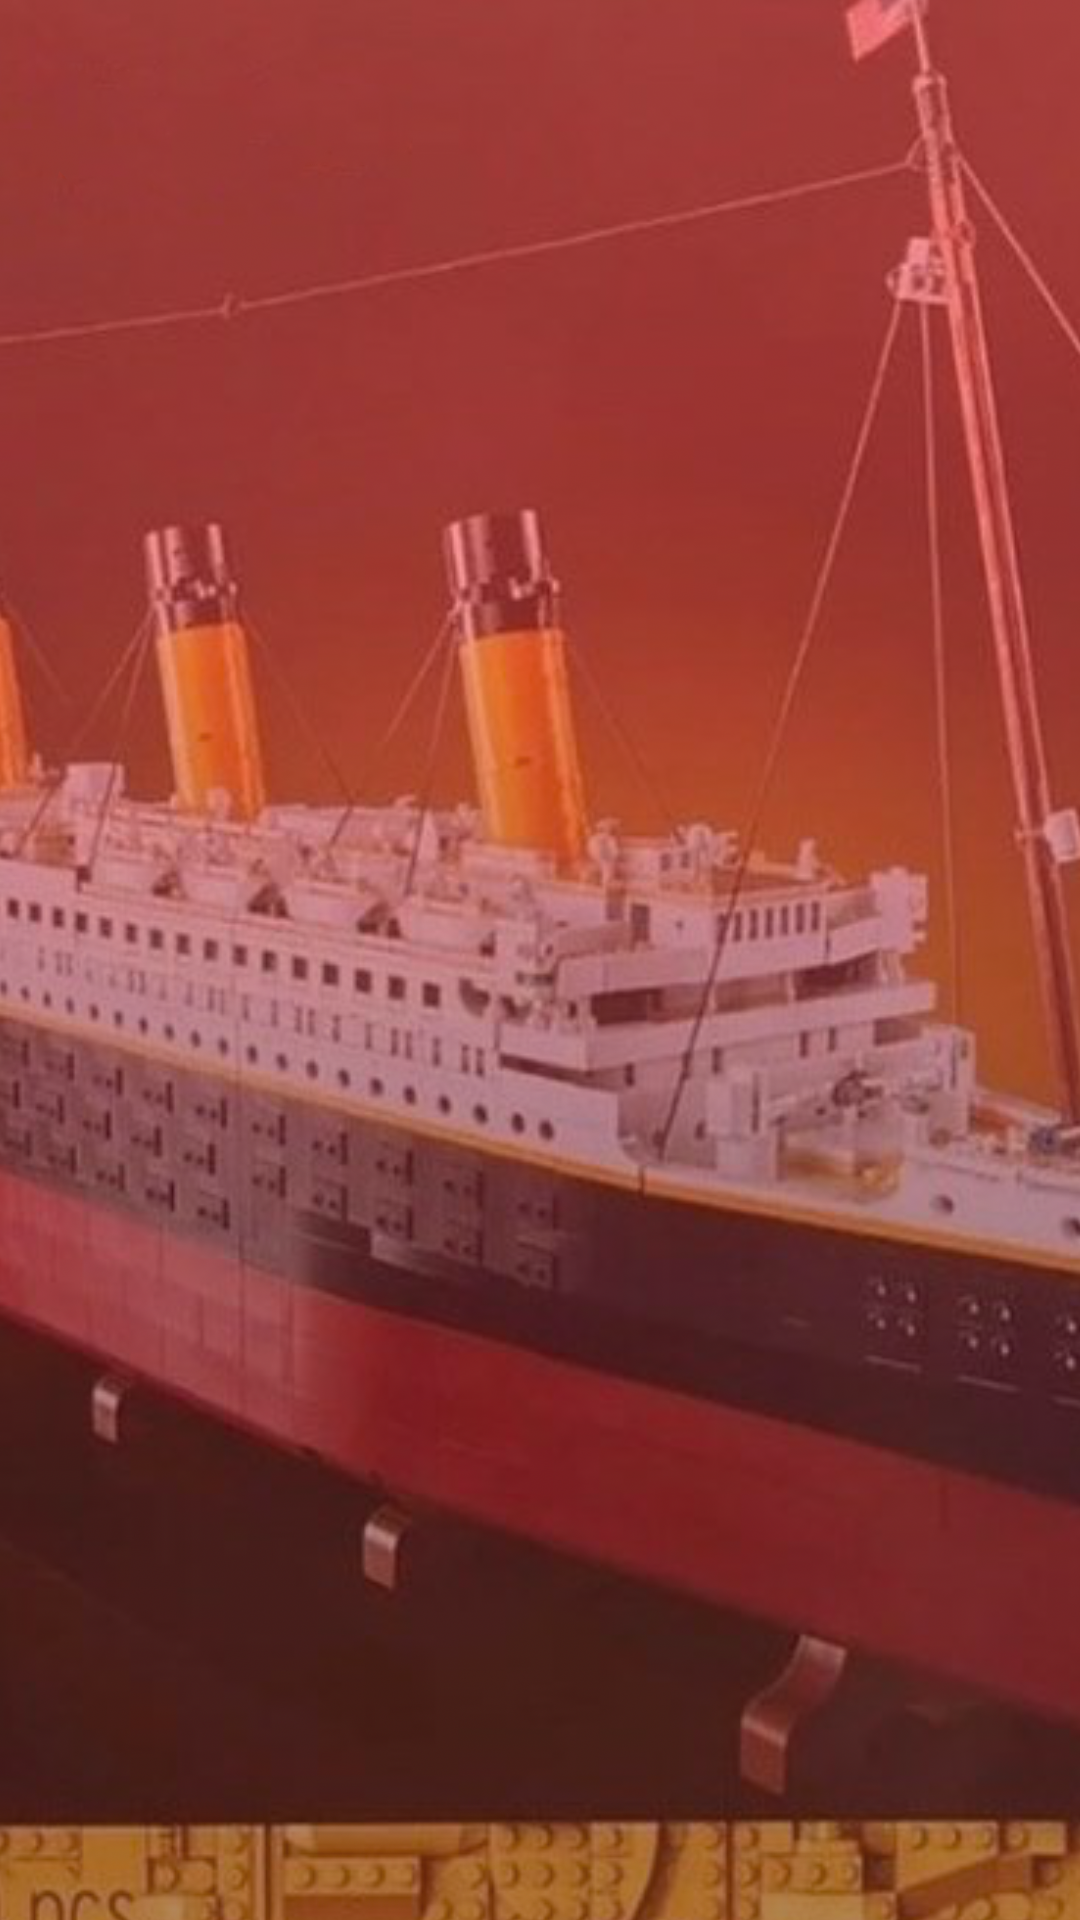 LEGO Titanic releasing this fall with 9,090 pieces - 9to5Toys